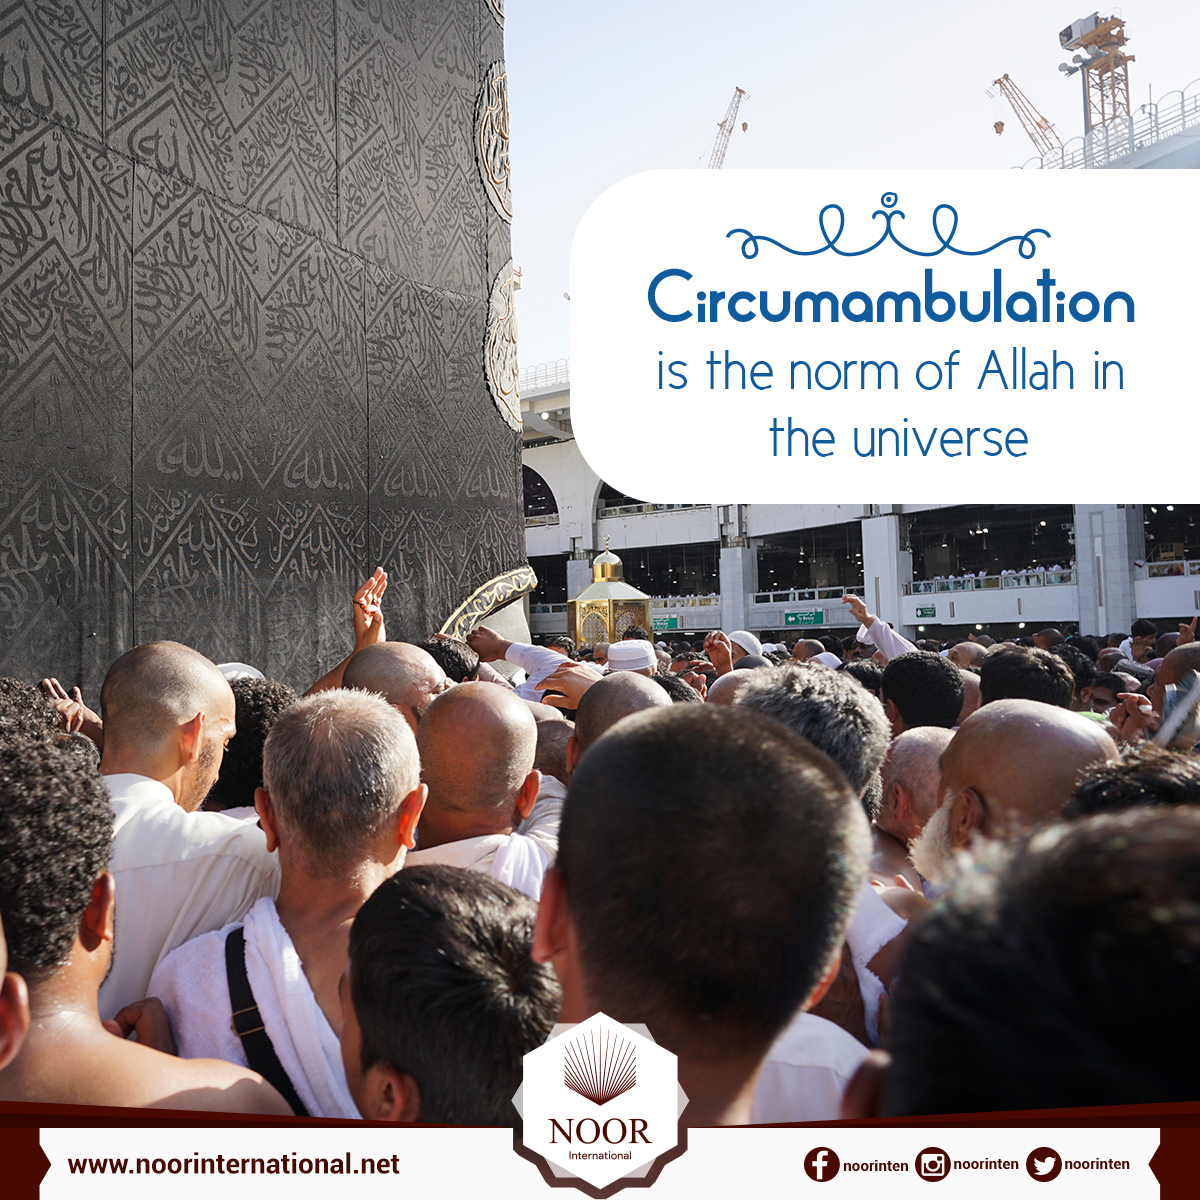 Circumambulation is the norm of Allah in the universe